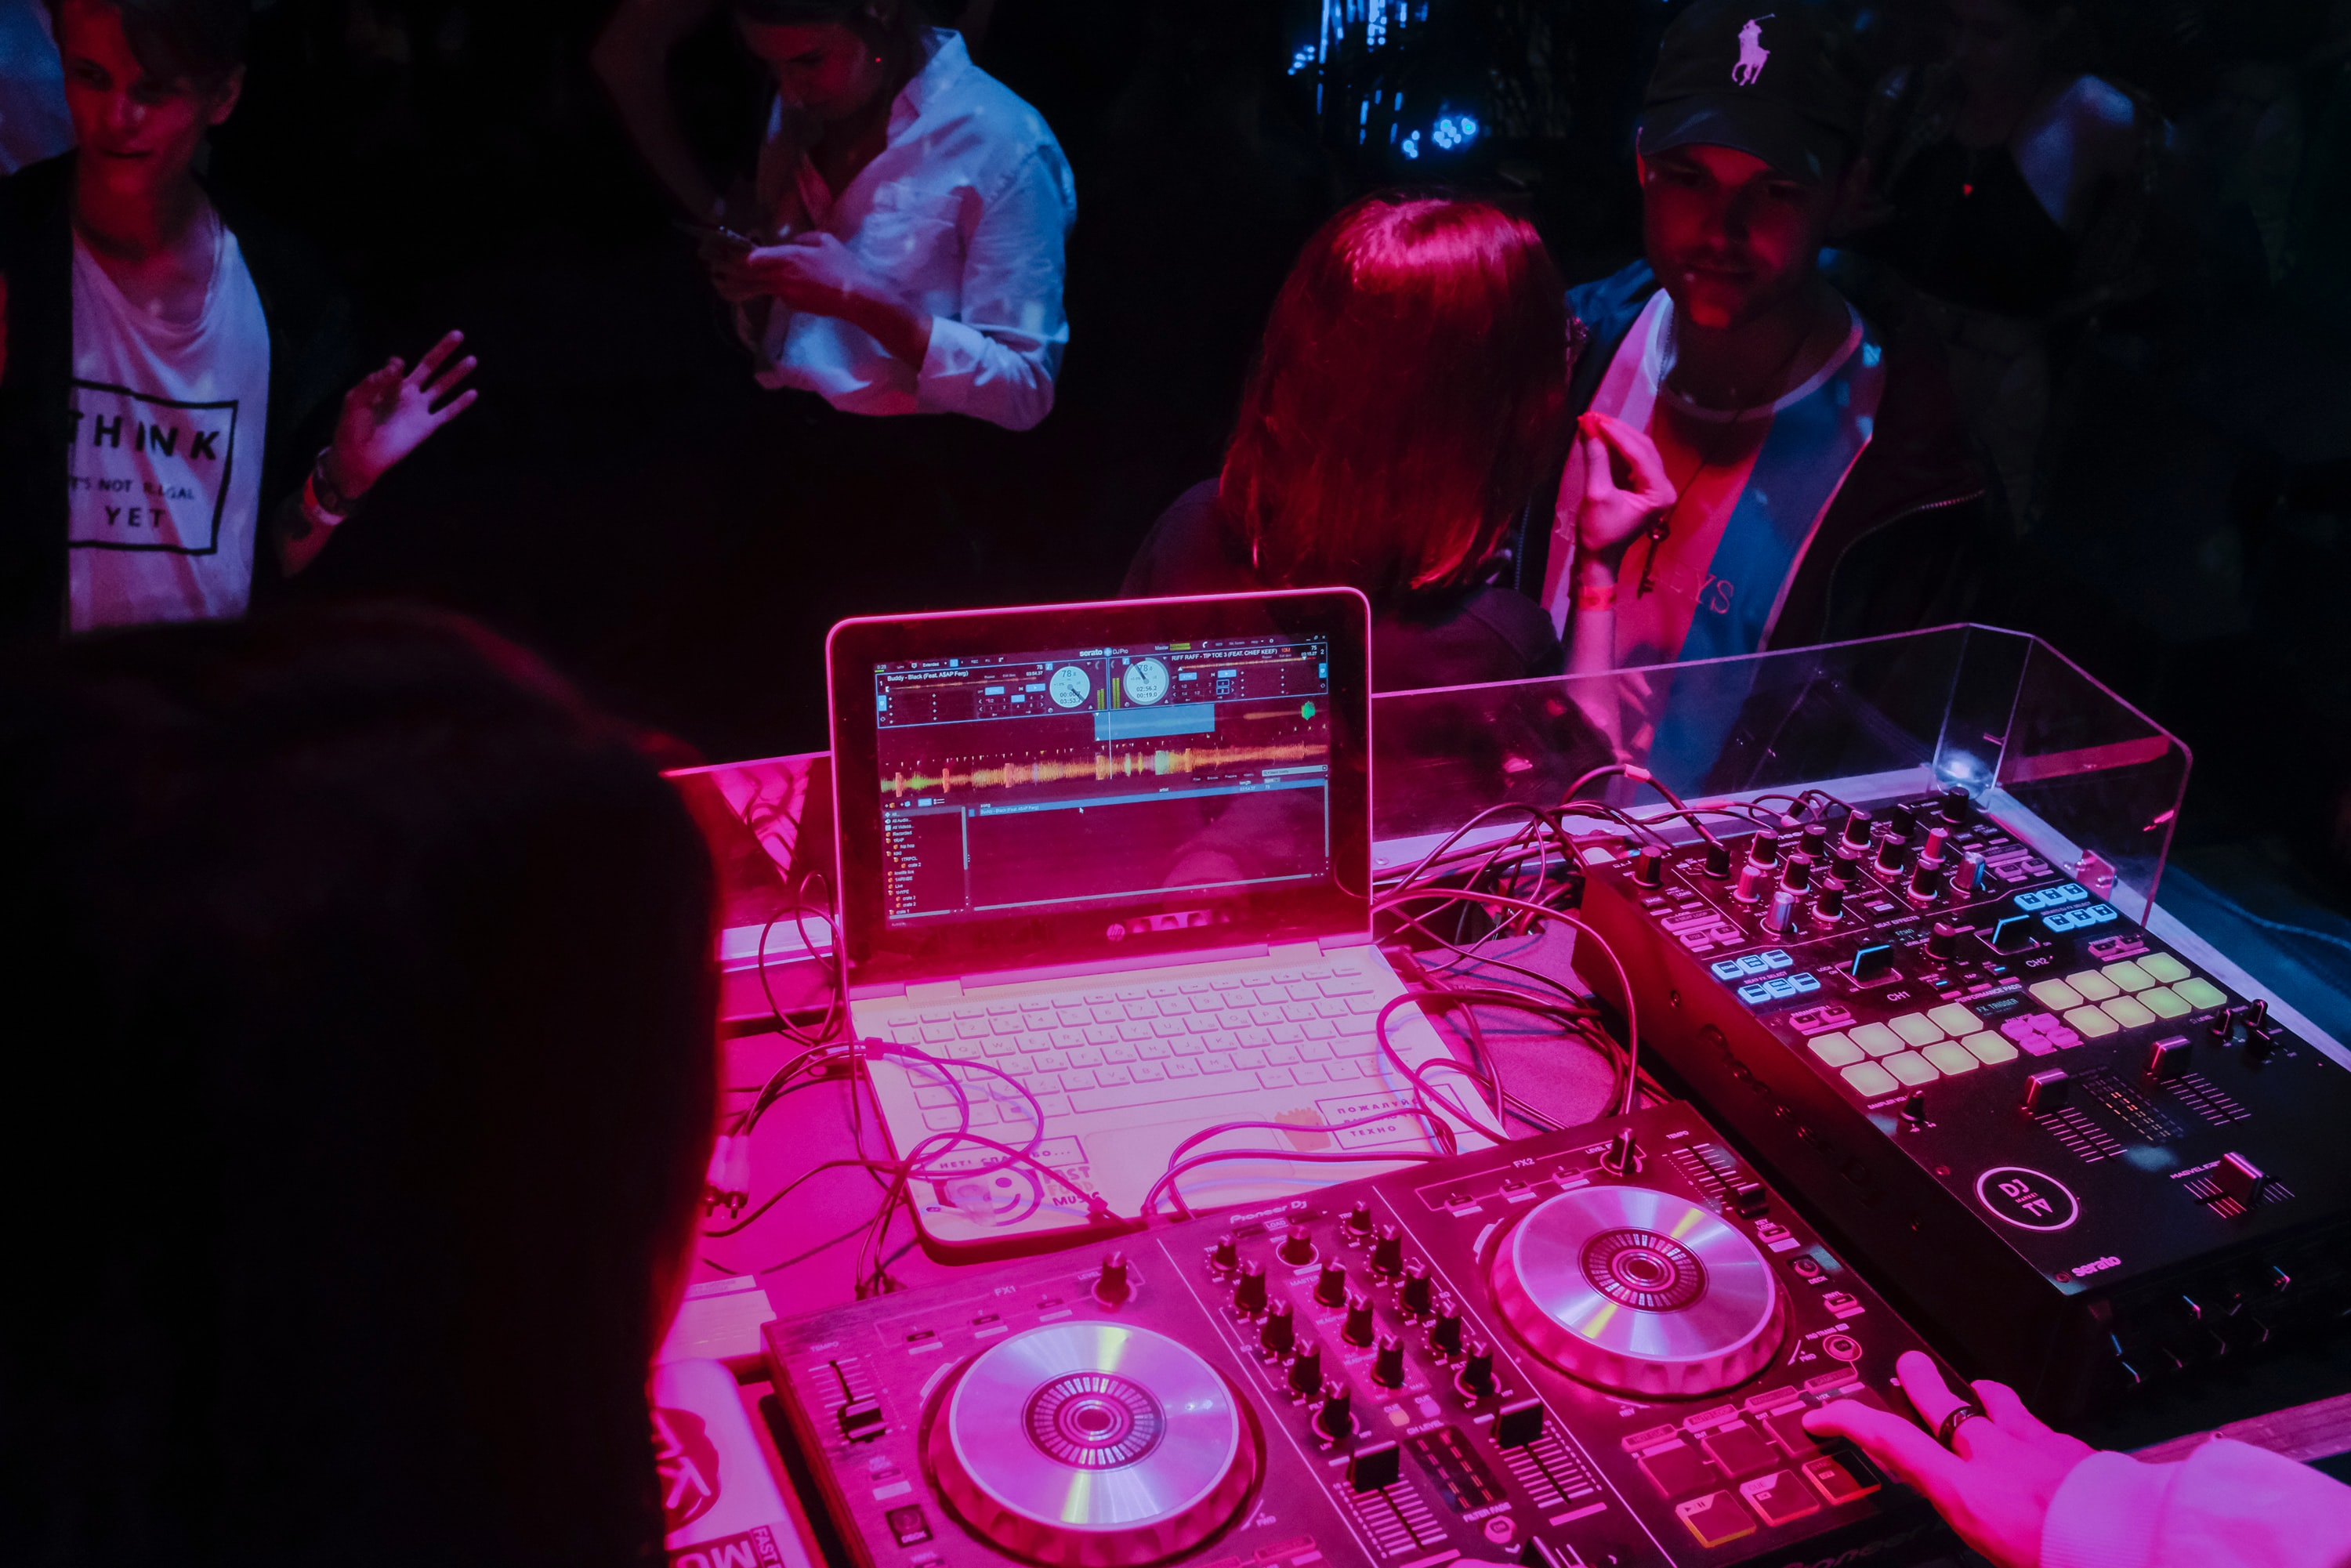 Image shows a laptop attached to DJ decks, people are dancing in the background